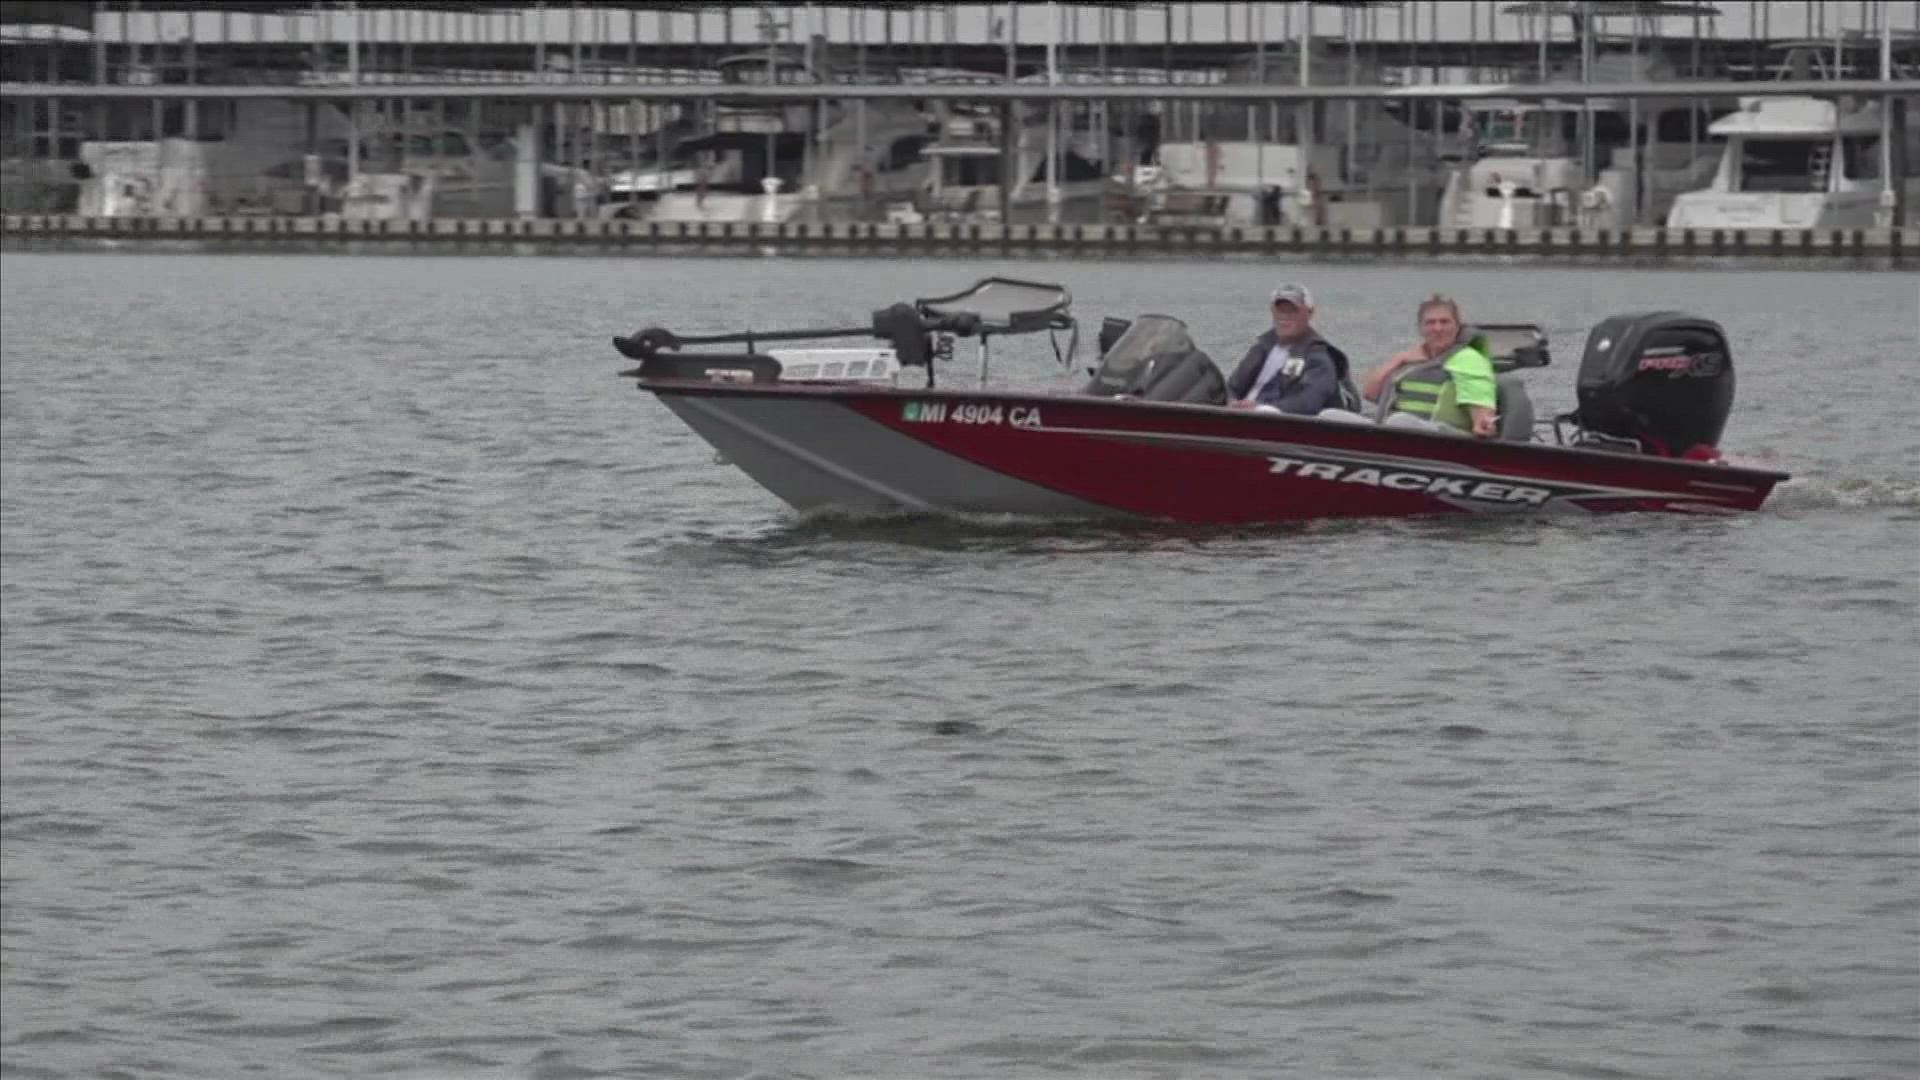 We went out on the lake Friday to show you how to be safe while boating.